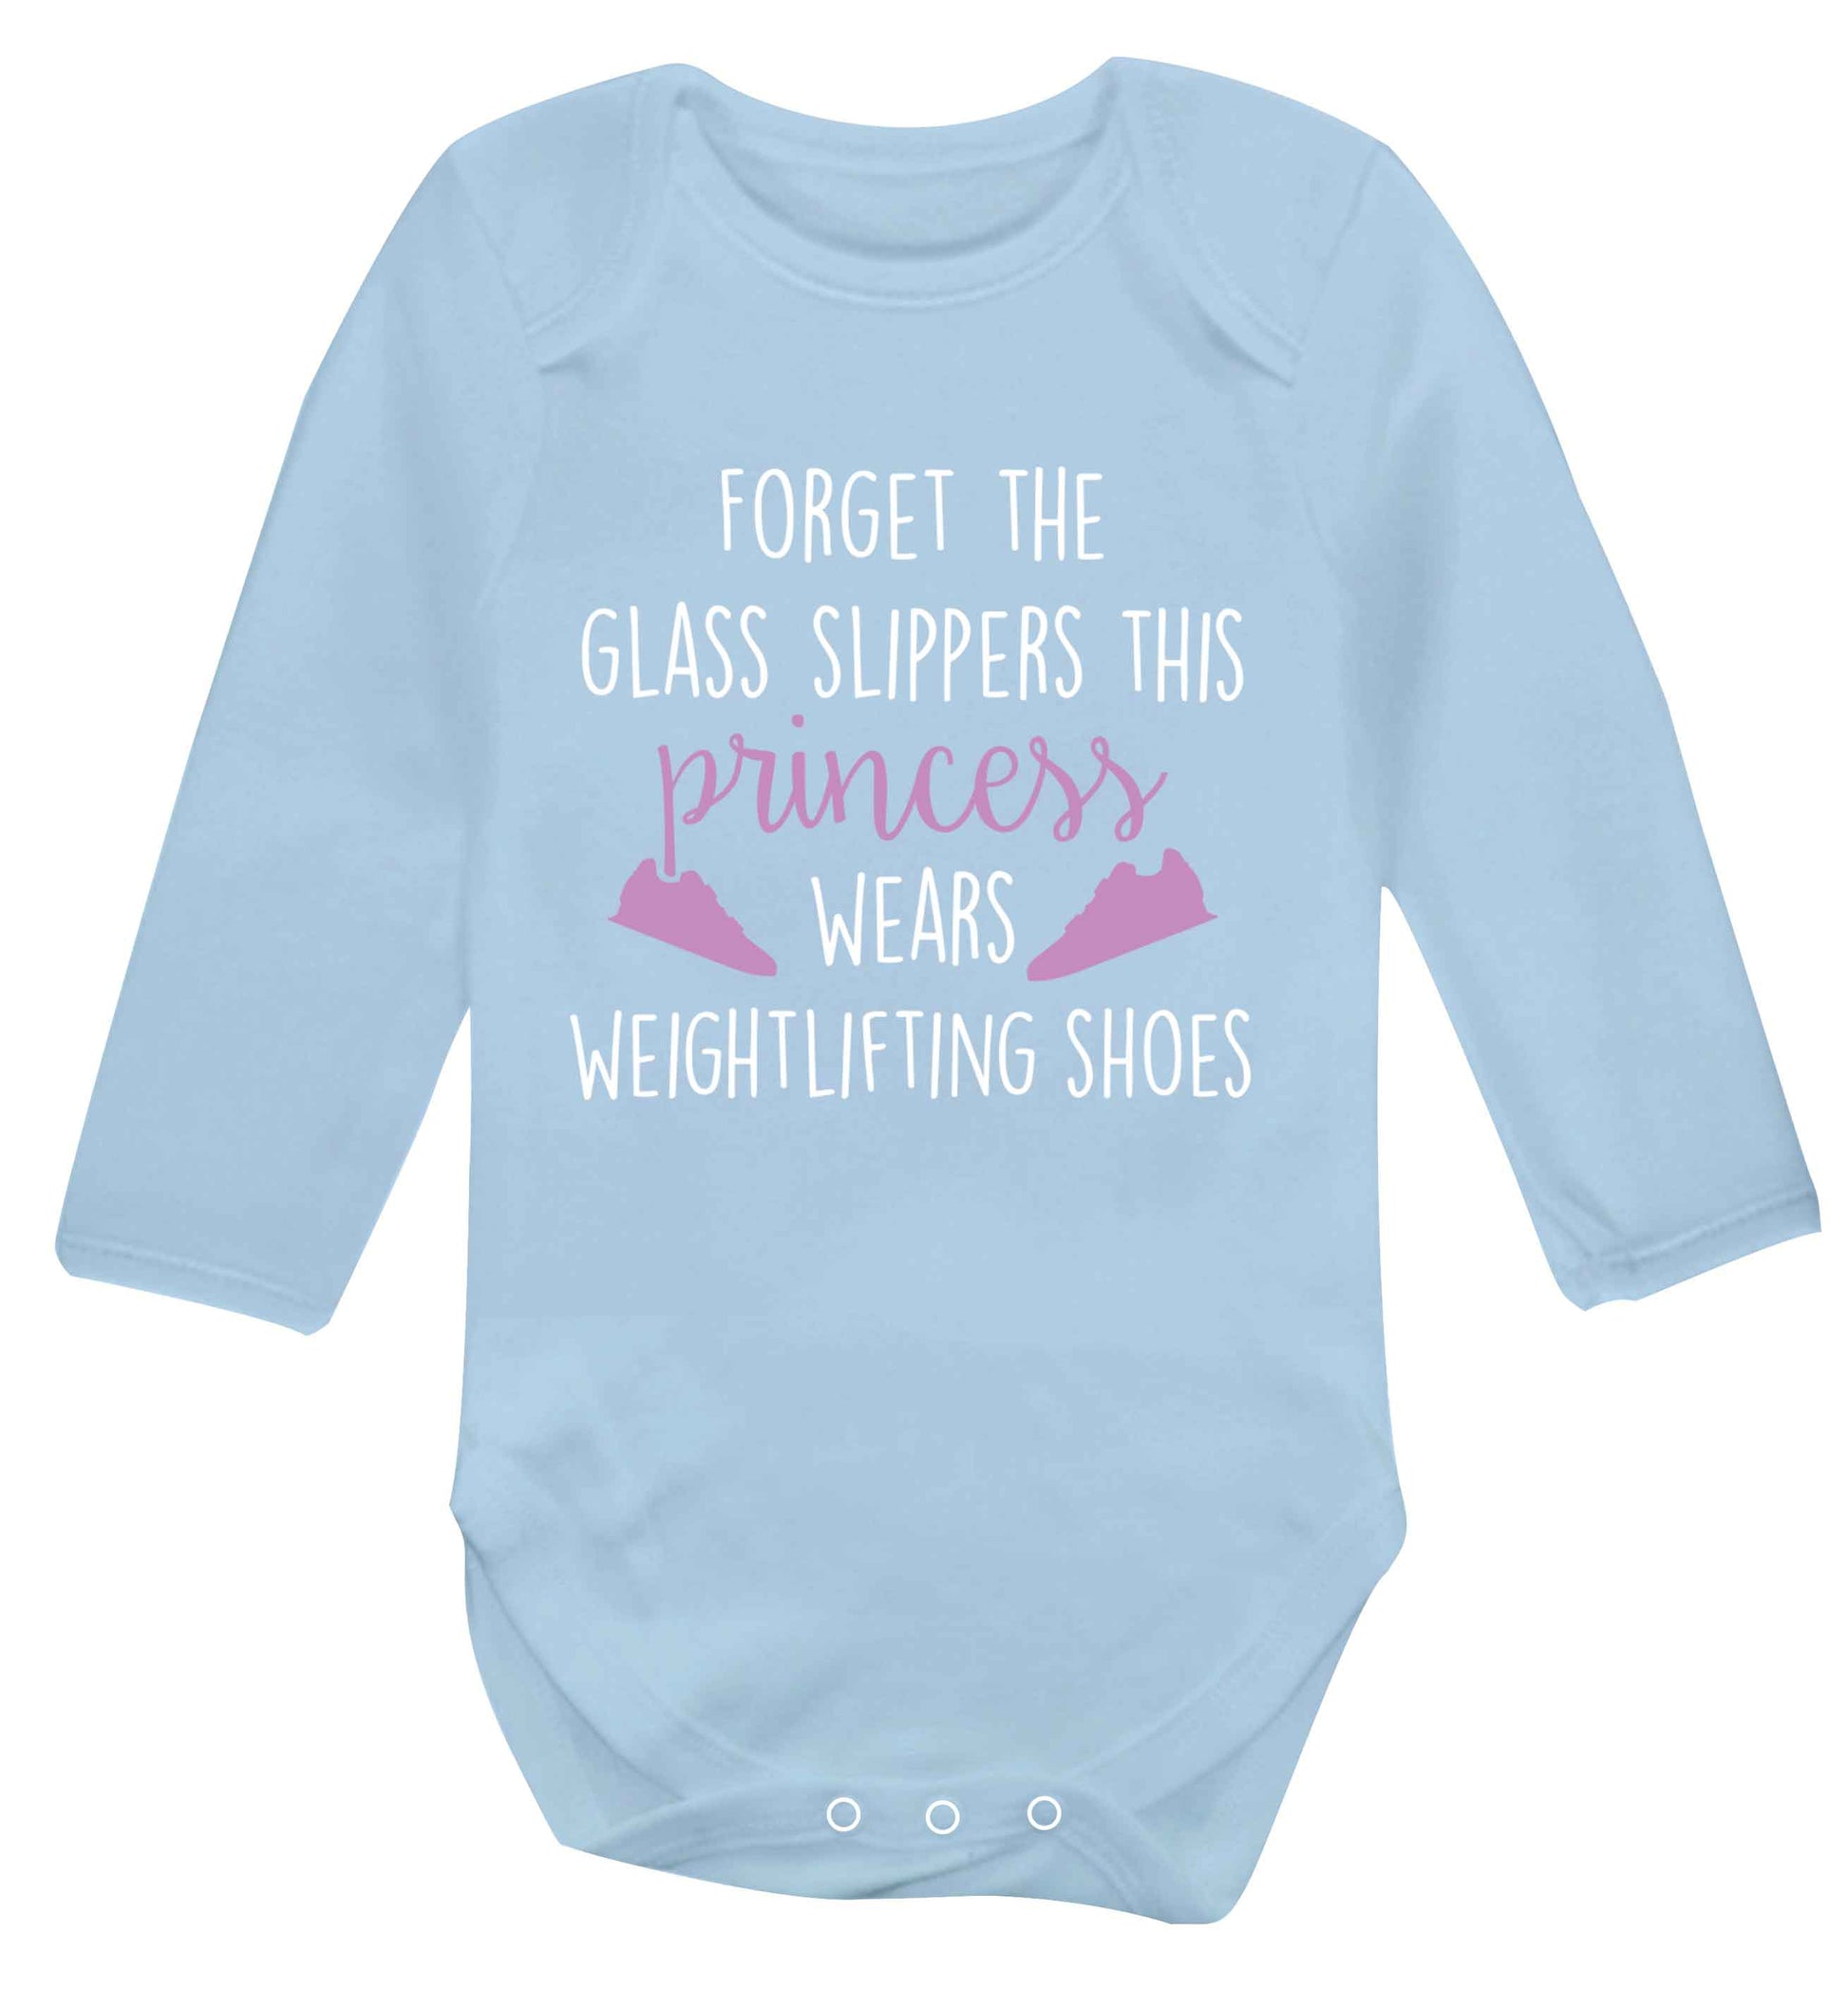 Forget the glass slippers this princess wears weightlifting shoes Baby Vest long sleeved pale blue 6-12 months